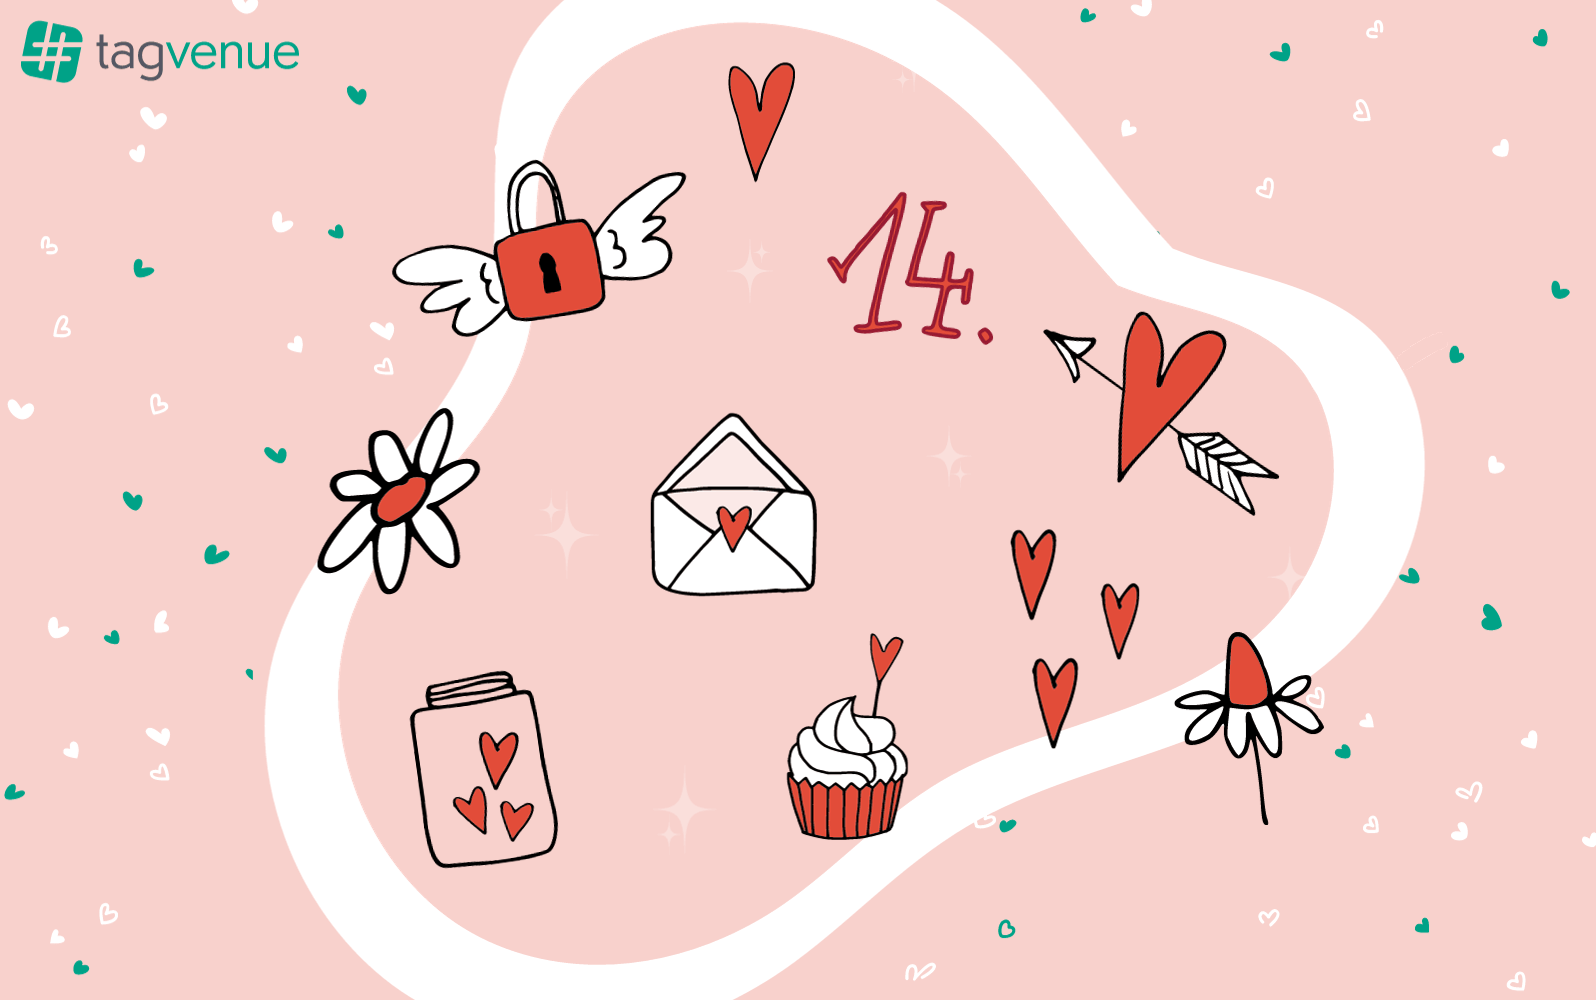 14 Valentine's Day Drawing Ideas for February 14th - Let's Draw That!